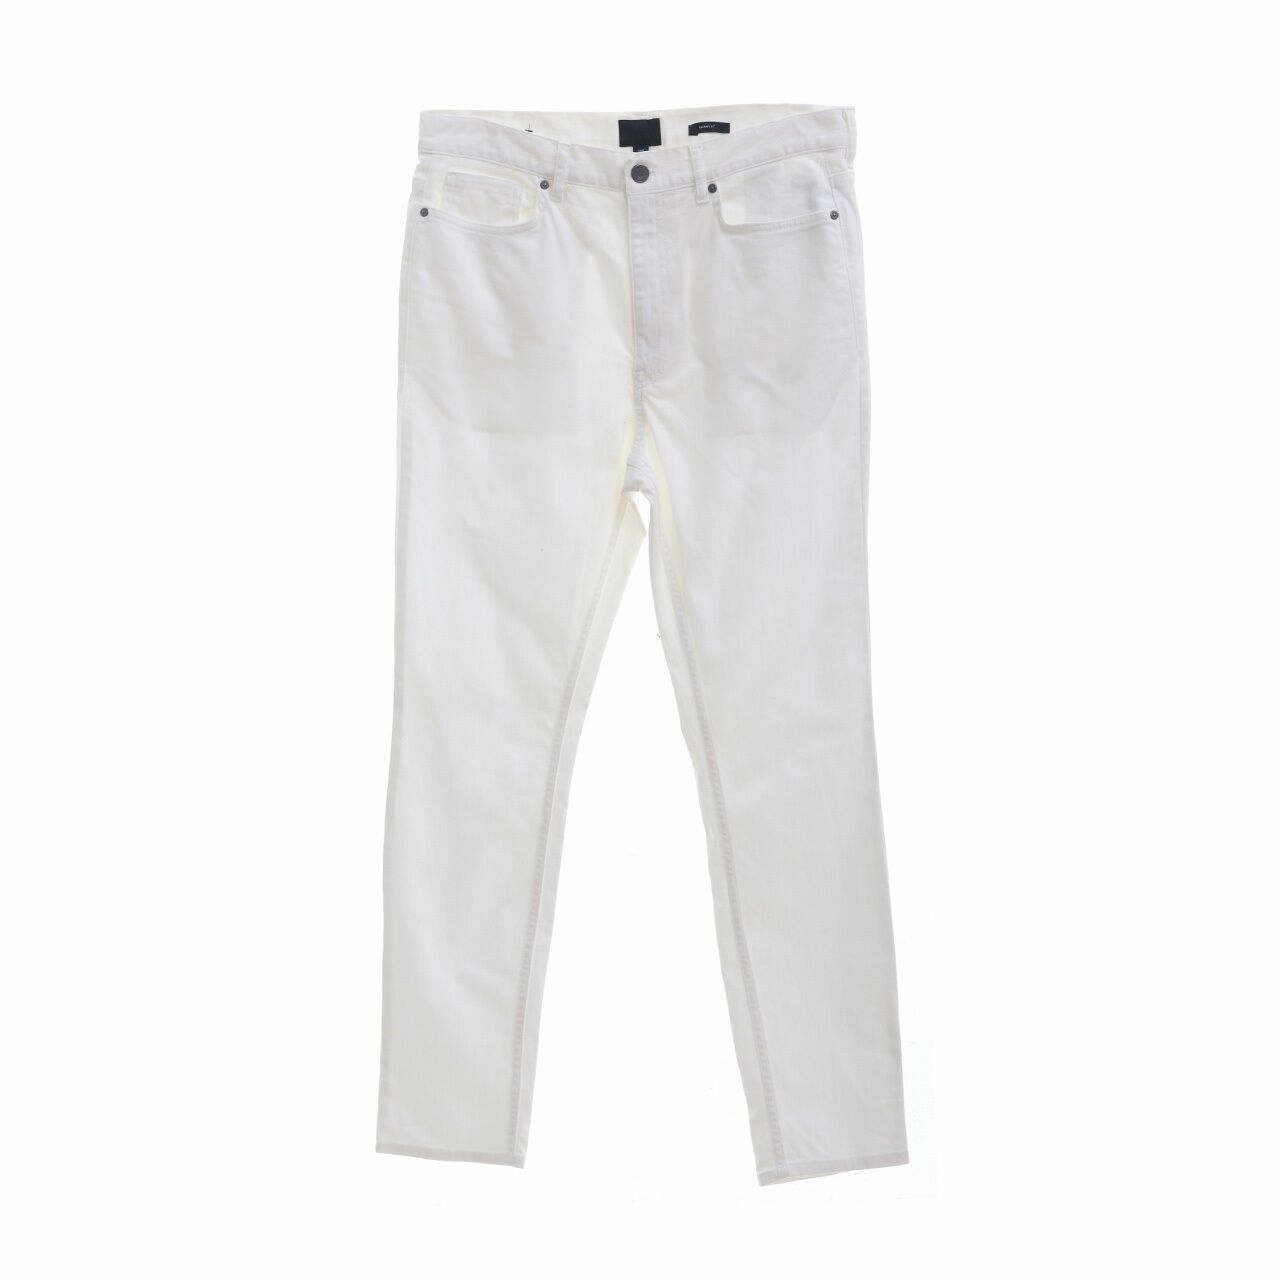 H&M Off White Skinny Fit Long Pants